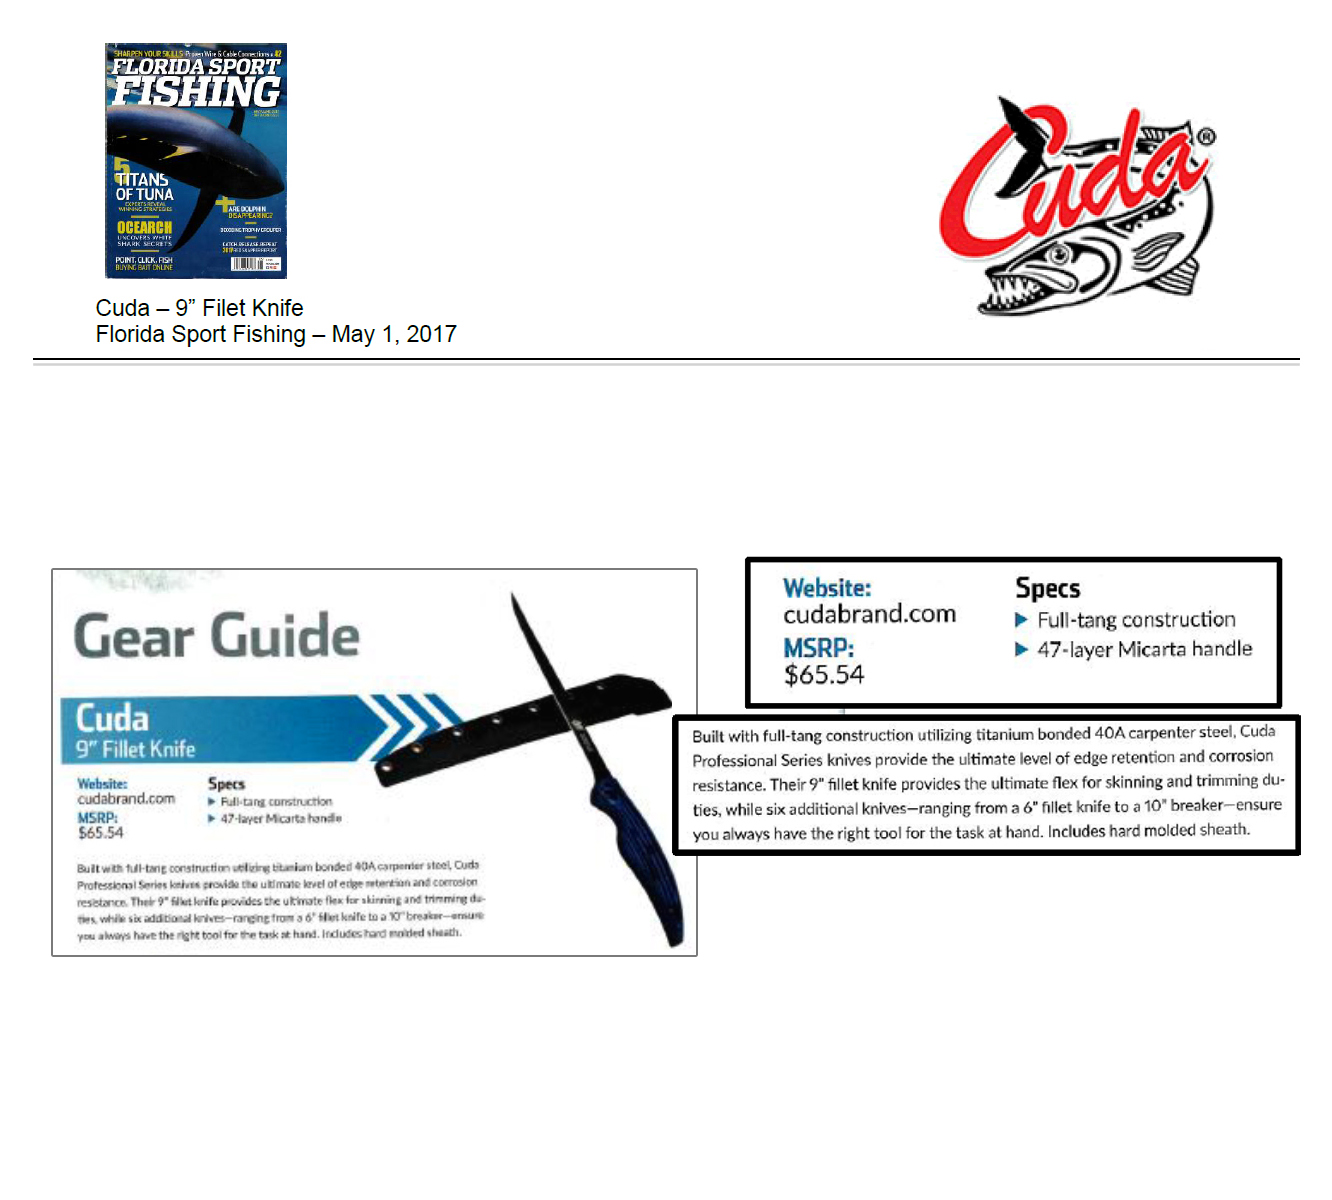 Gear Guide - Featured in Florida Sport Fishing – May 1, 2017